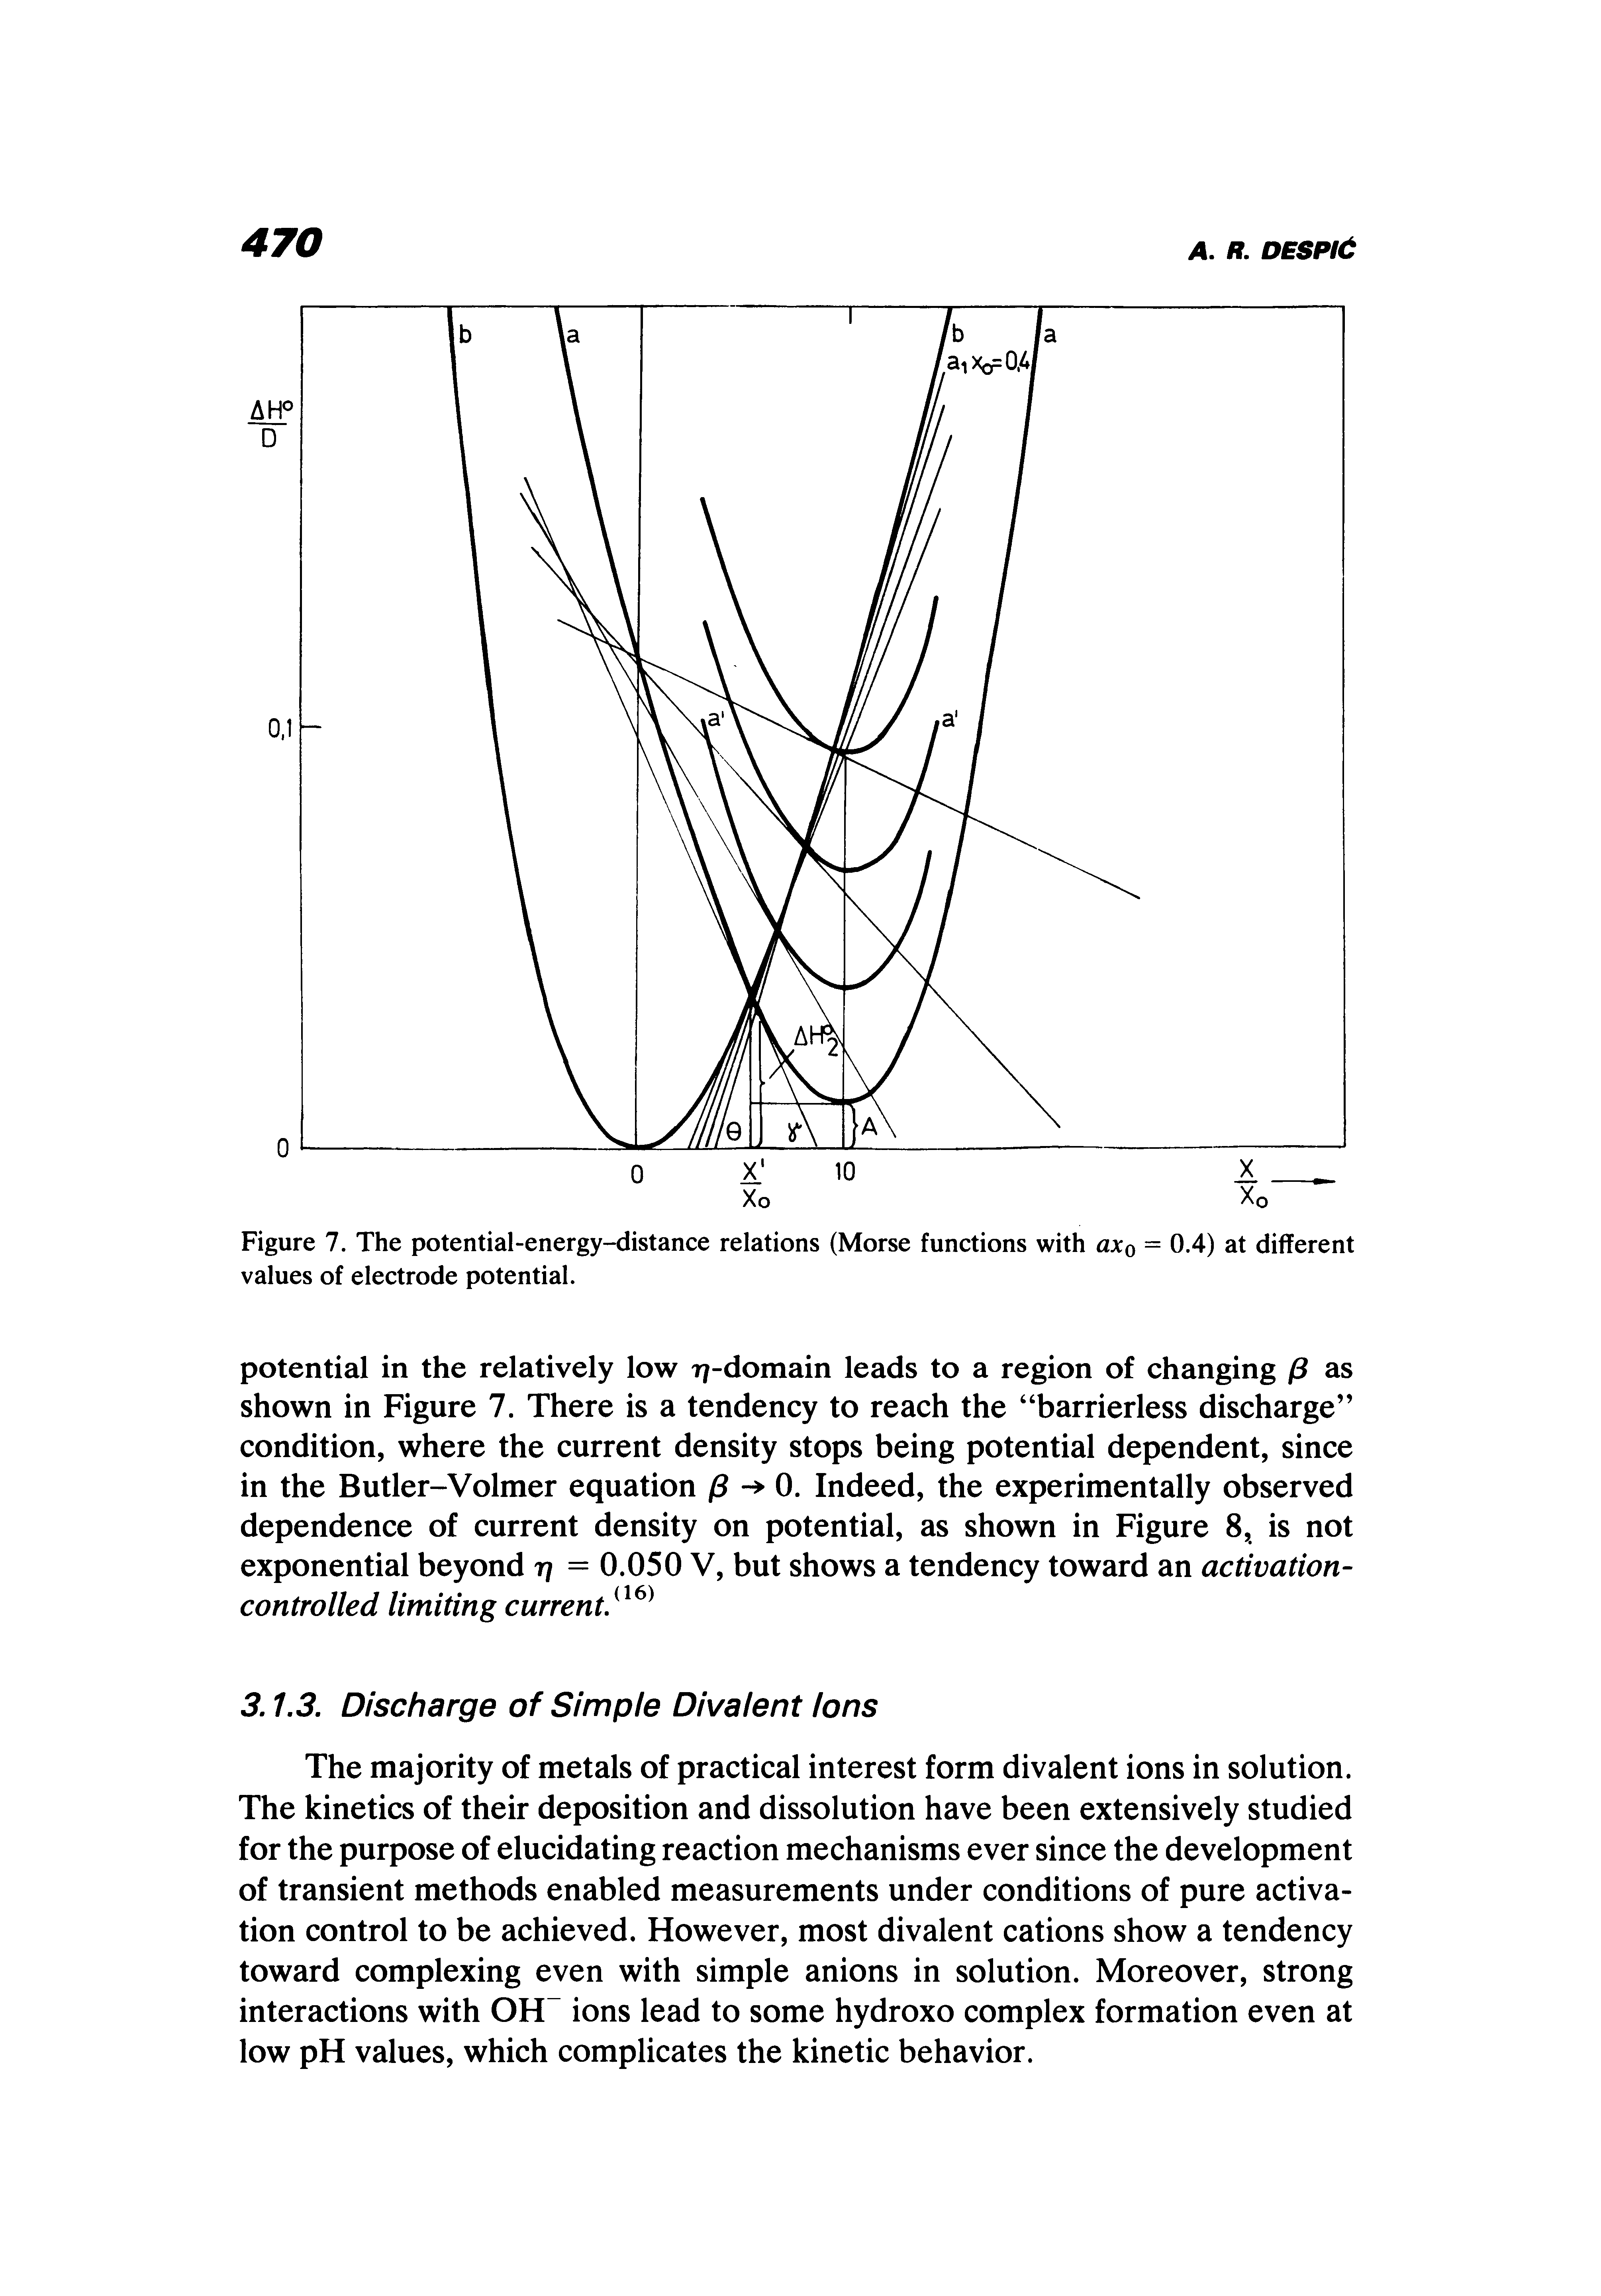 Figure 7. The potential-energy-distance relations (Morse functions with axo = 0.4) at different values of electrode potential.